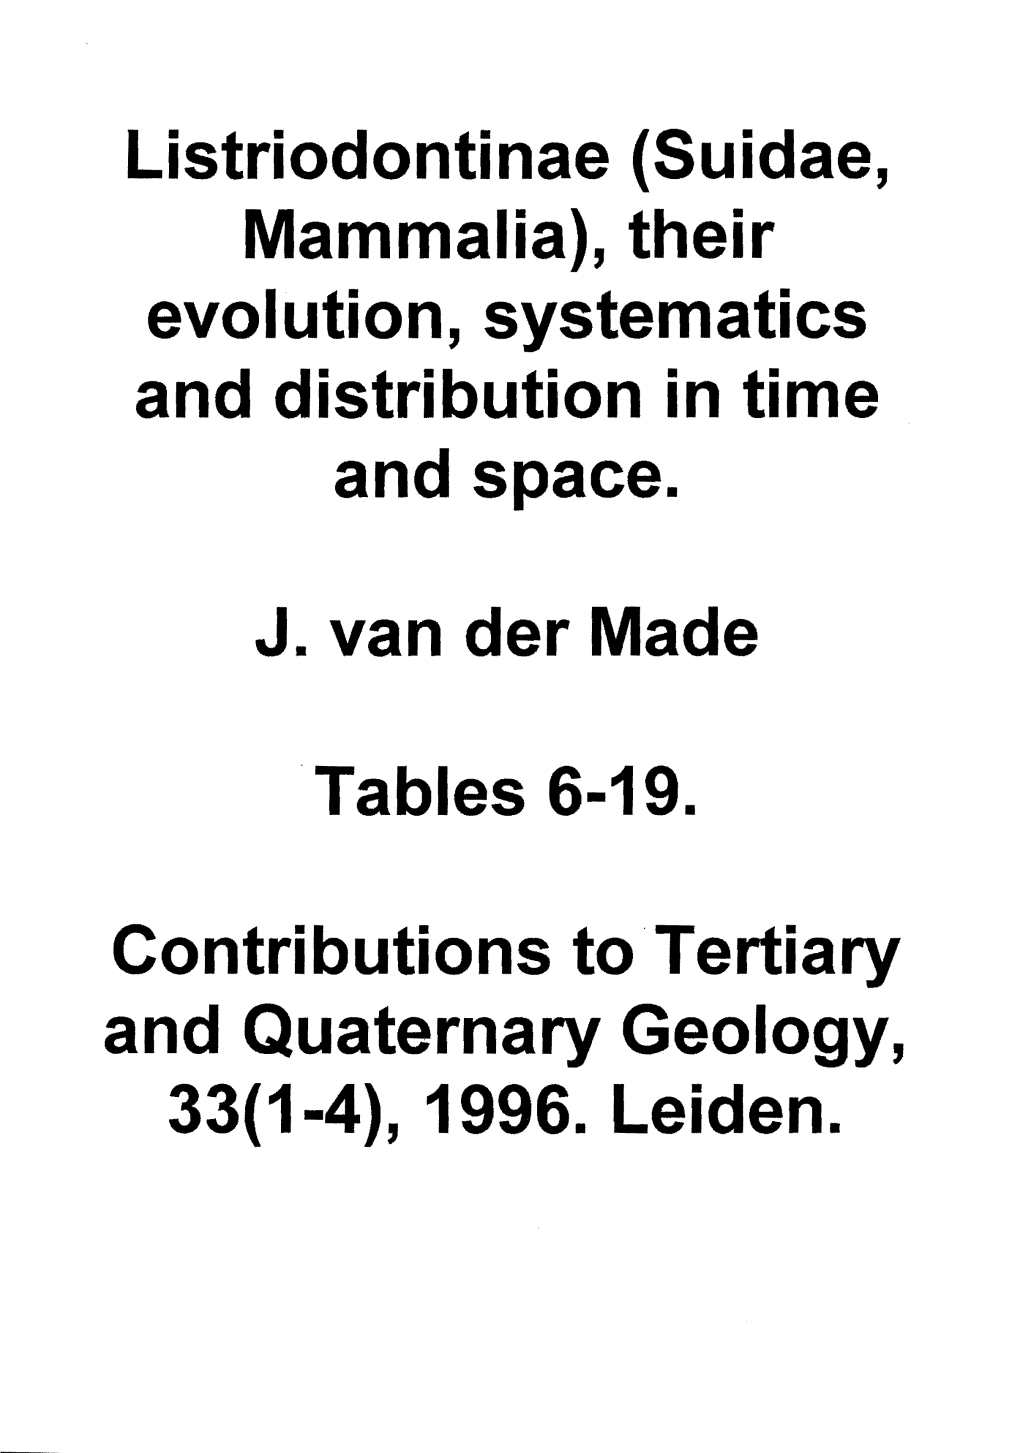 Listriodontinae (Suidae, Mammalia), Their Evolution, Systematics and Distribution in Time and Space